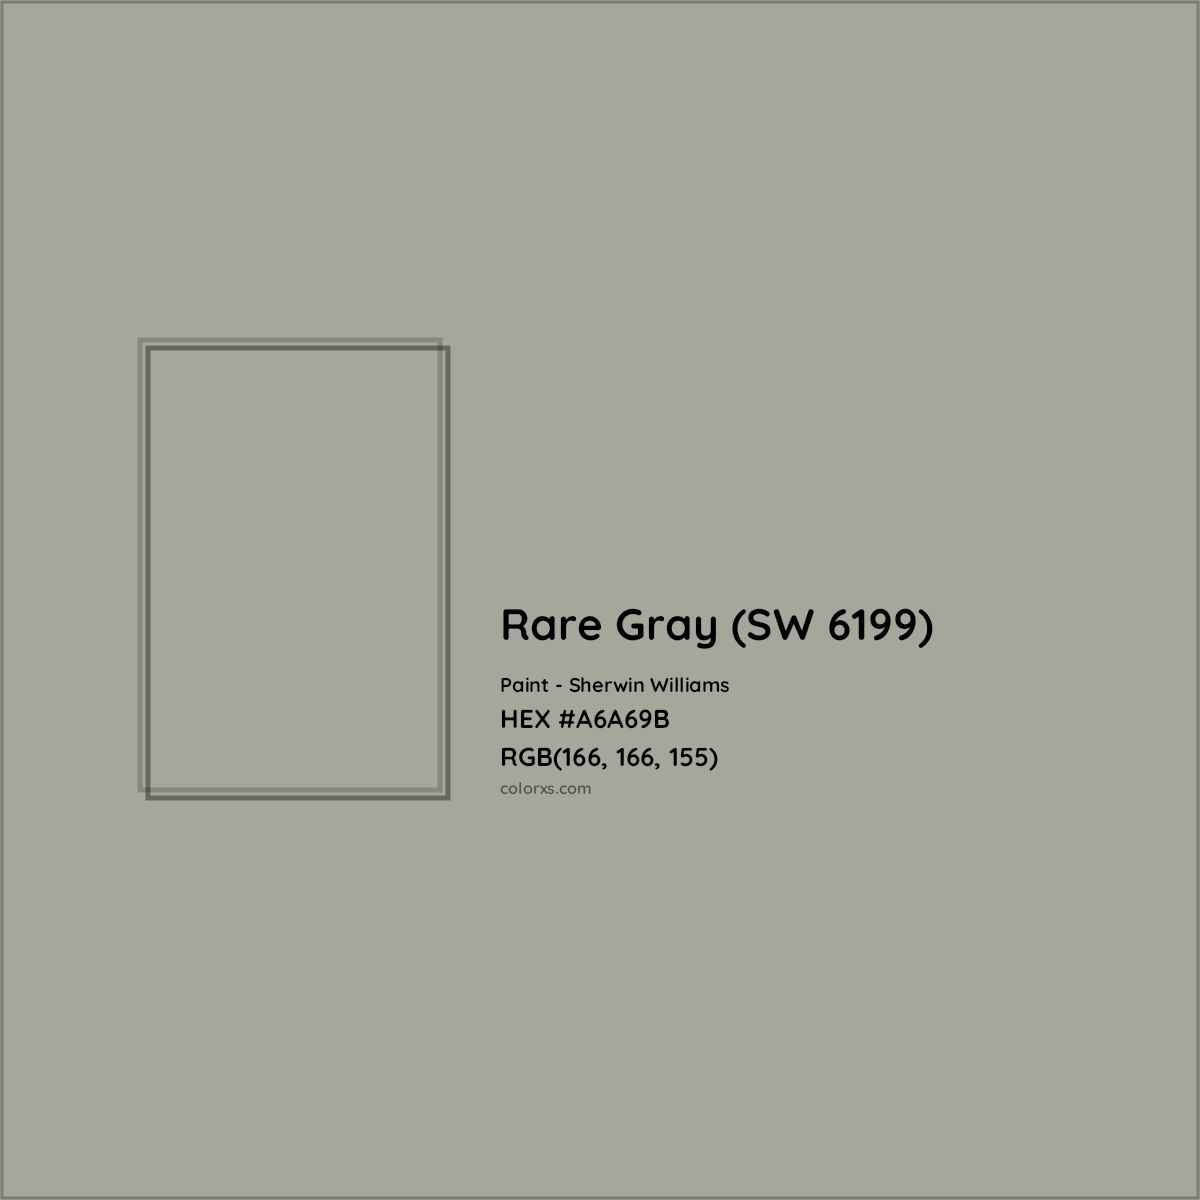 Rare Gray (SW 6199) Complementary or Opposite Color Name and Code (#A6A69B)  